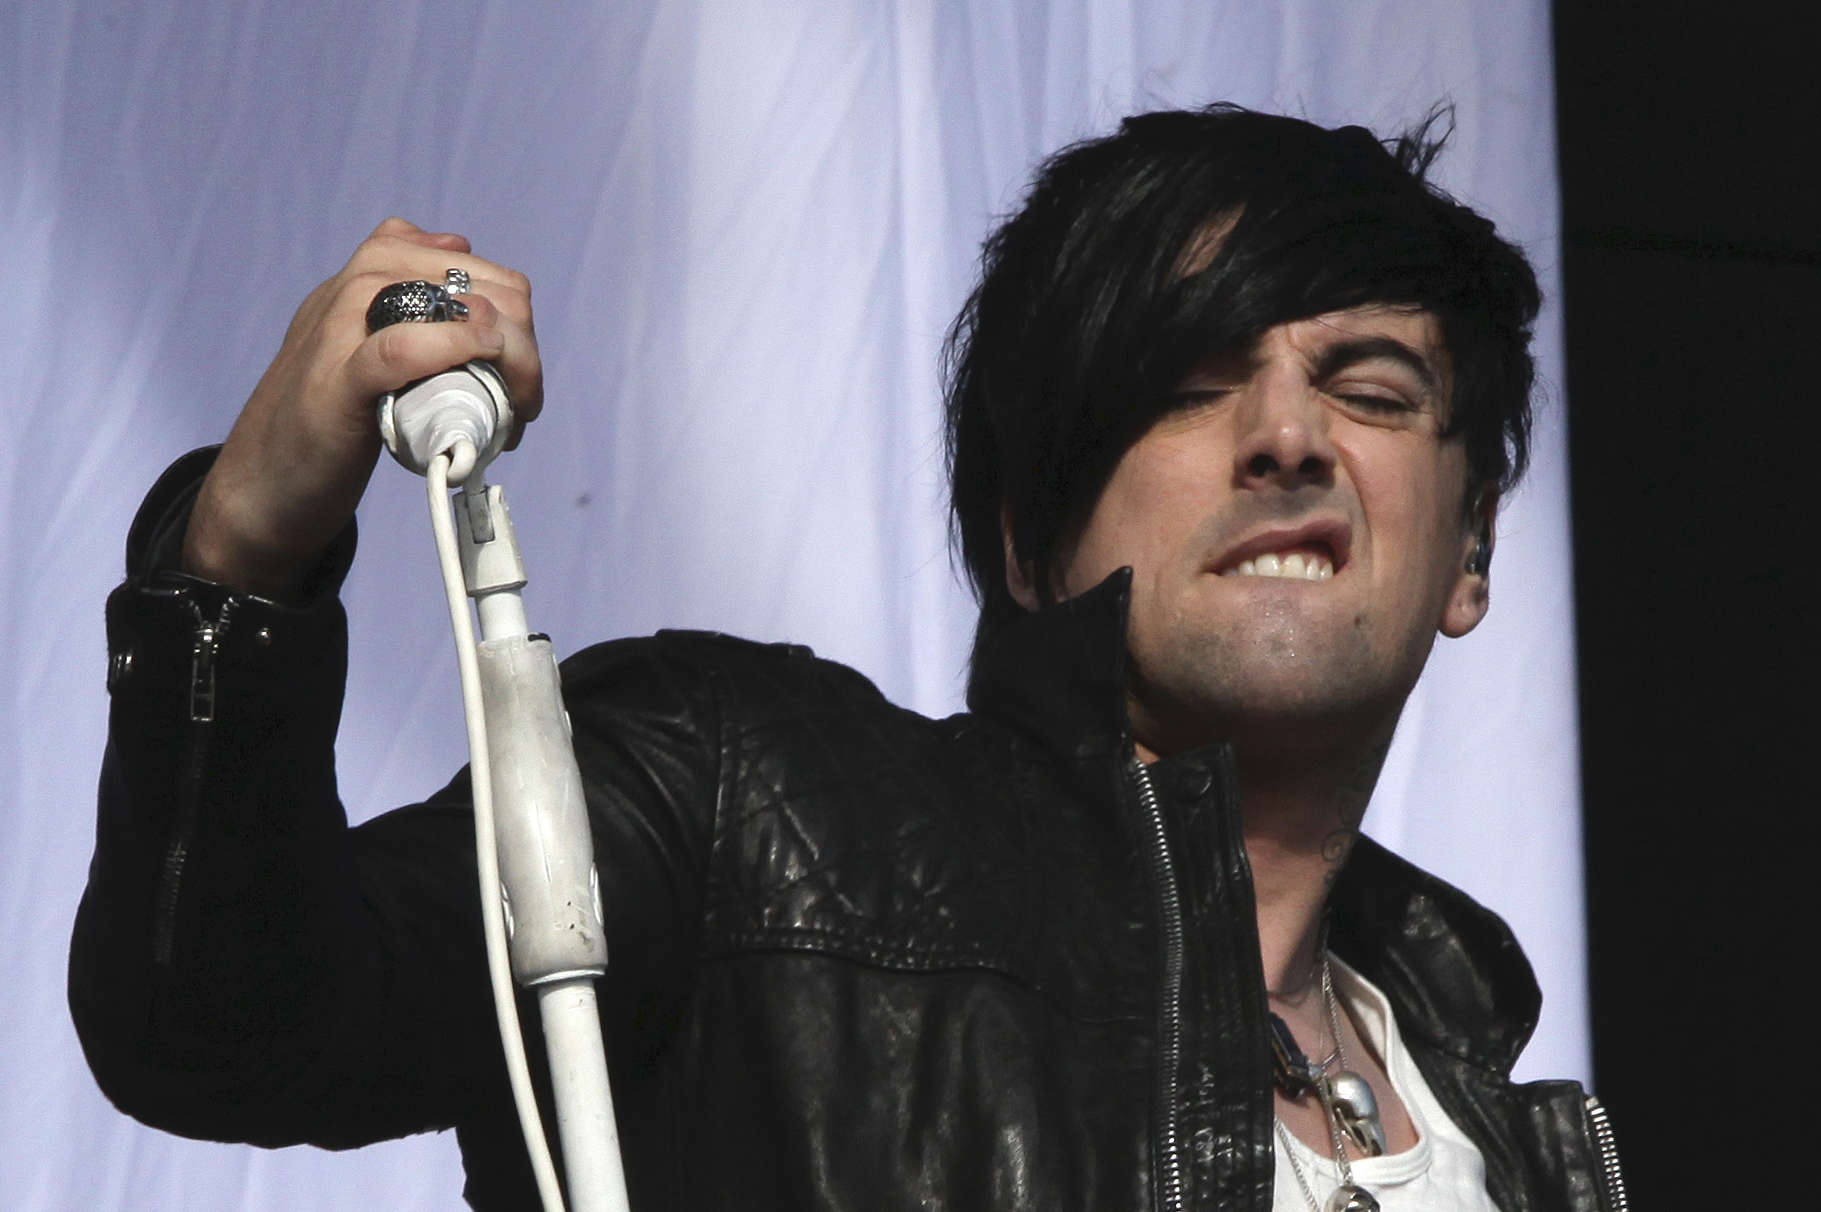 In December 2013 Ian Watkins Lead Singer Of The Welsh Rock Band Lostprophets Was Sentenced To 35 Years In Prison For Multiple Sexual Offenses Against Children  